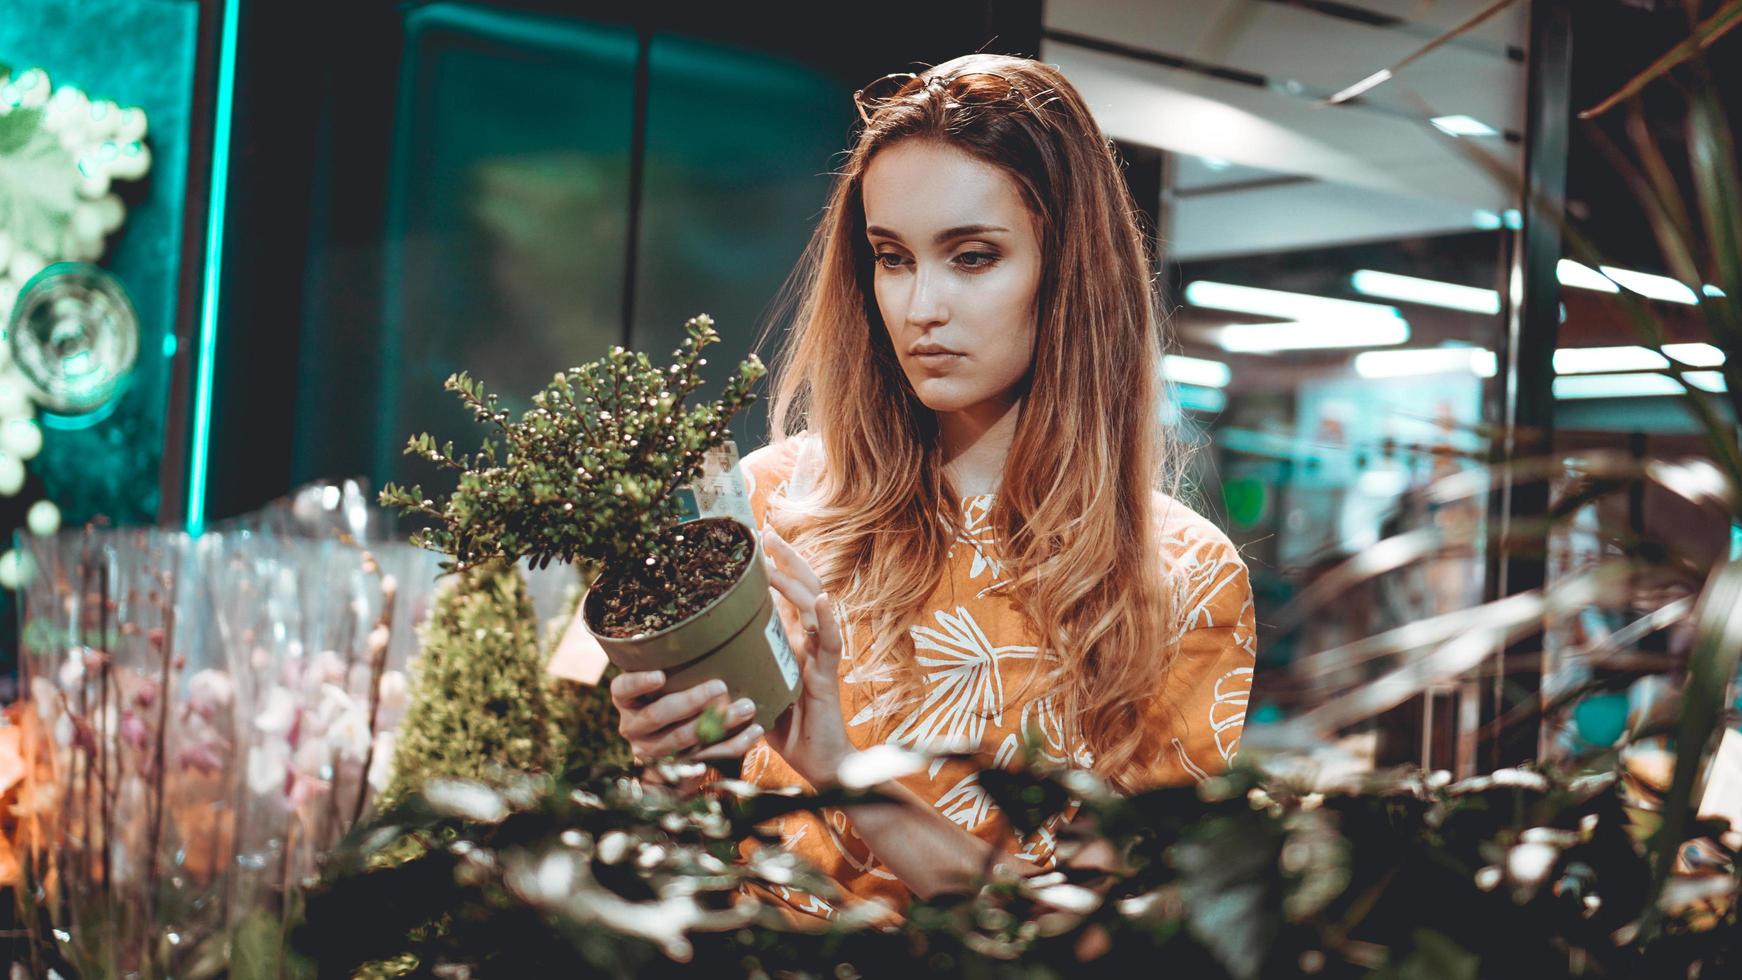 Young woman buying flowers at a garden center photo